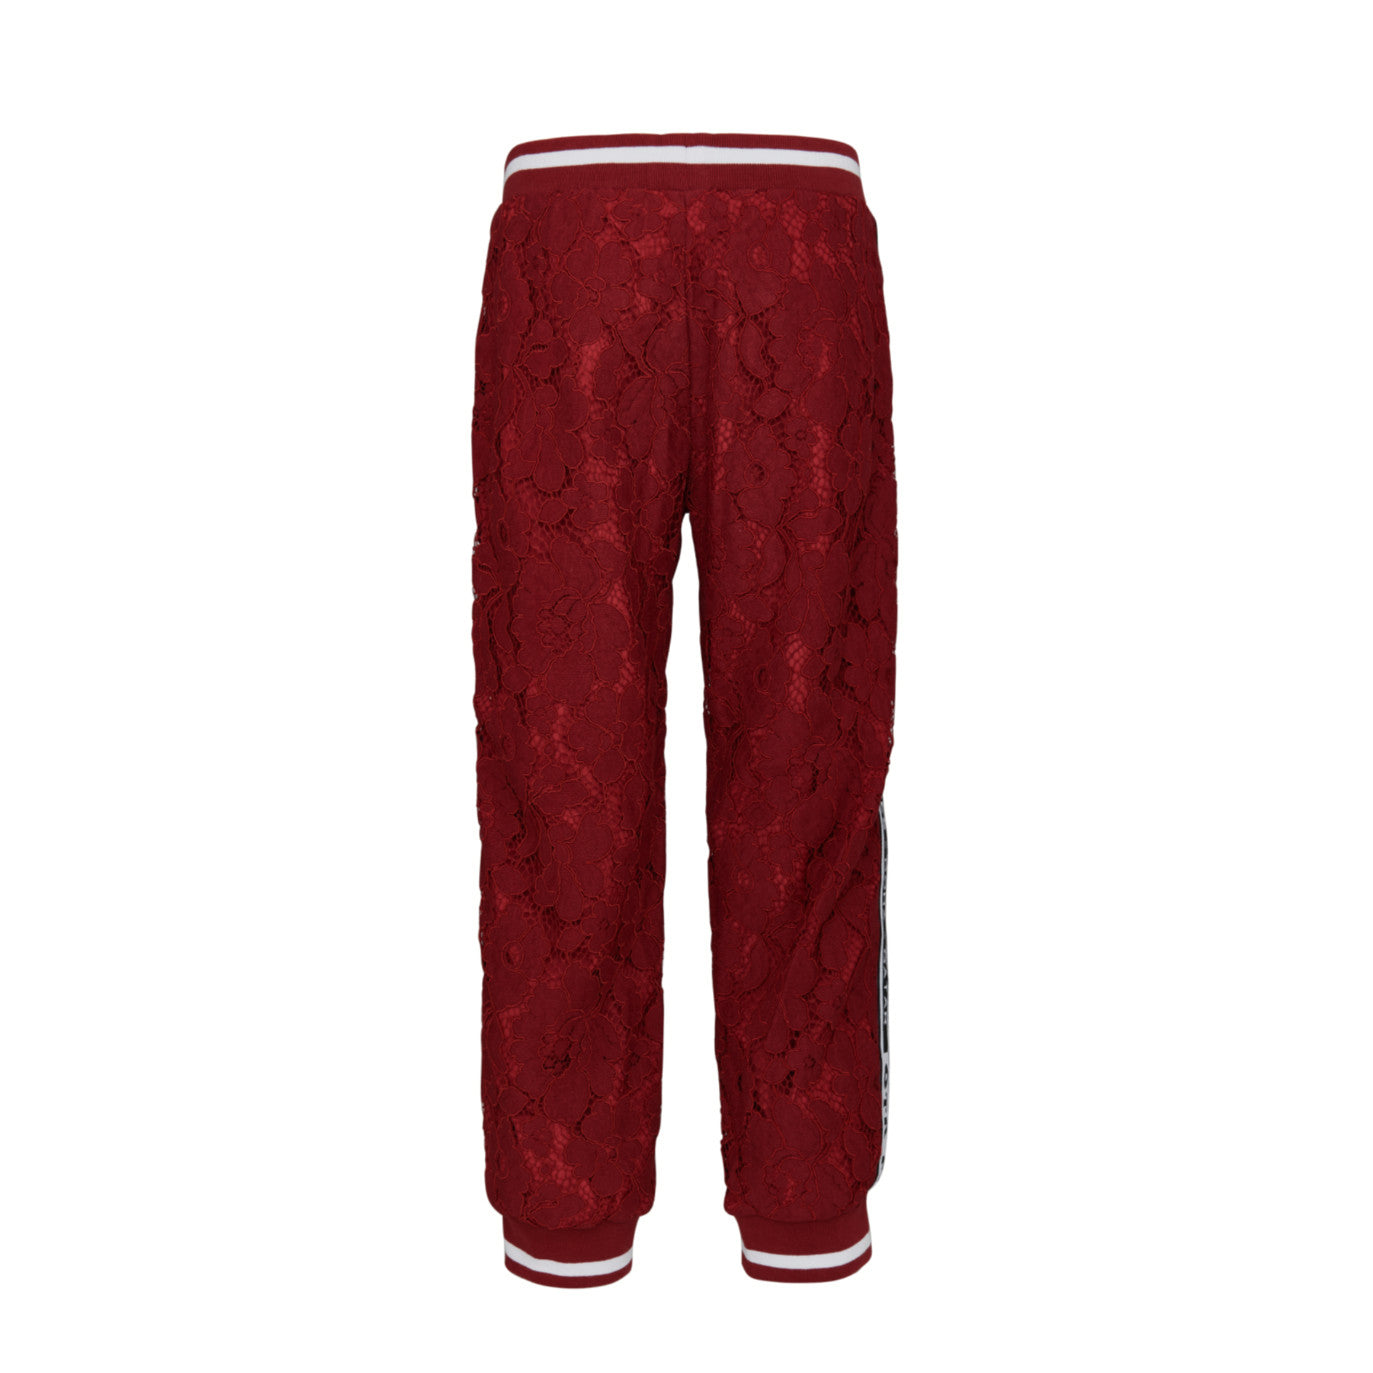 Maroon cotton lace trousers. 20F-146